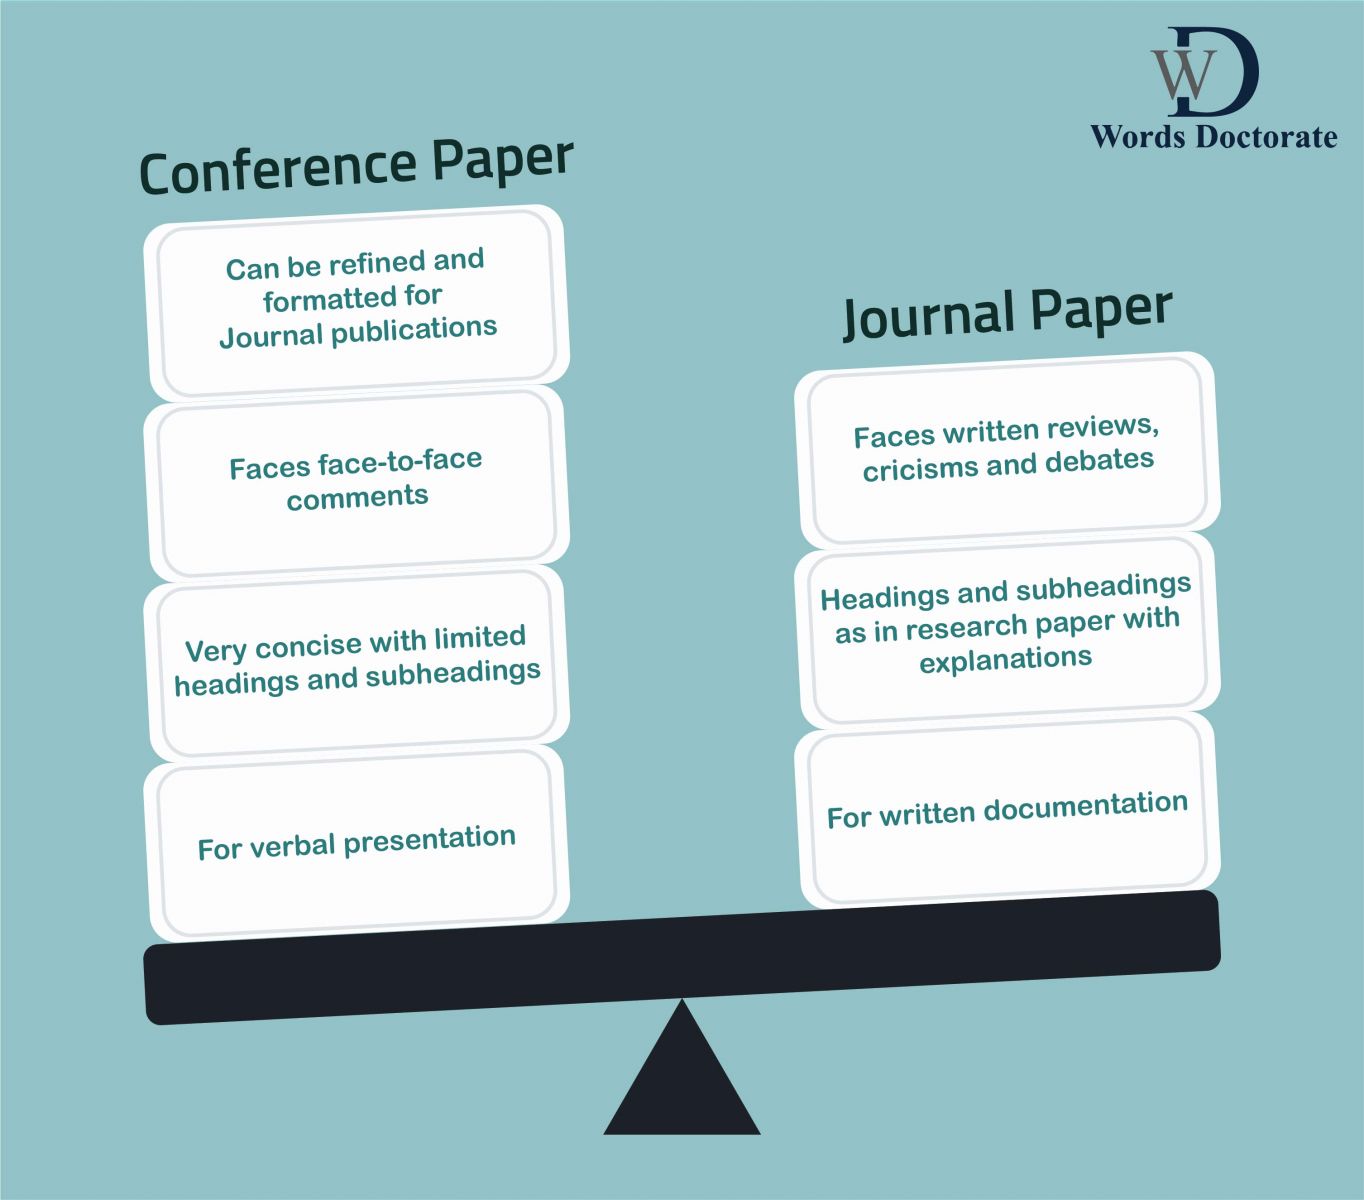 Conference Papers vs Journal Papers - Words Doctorate